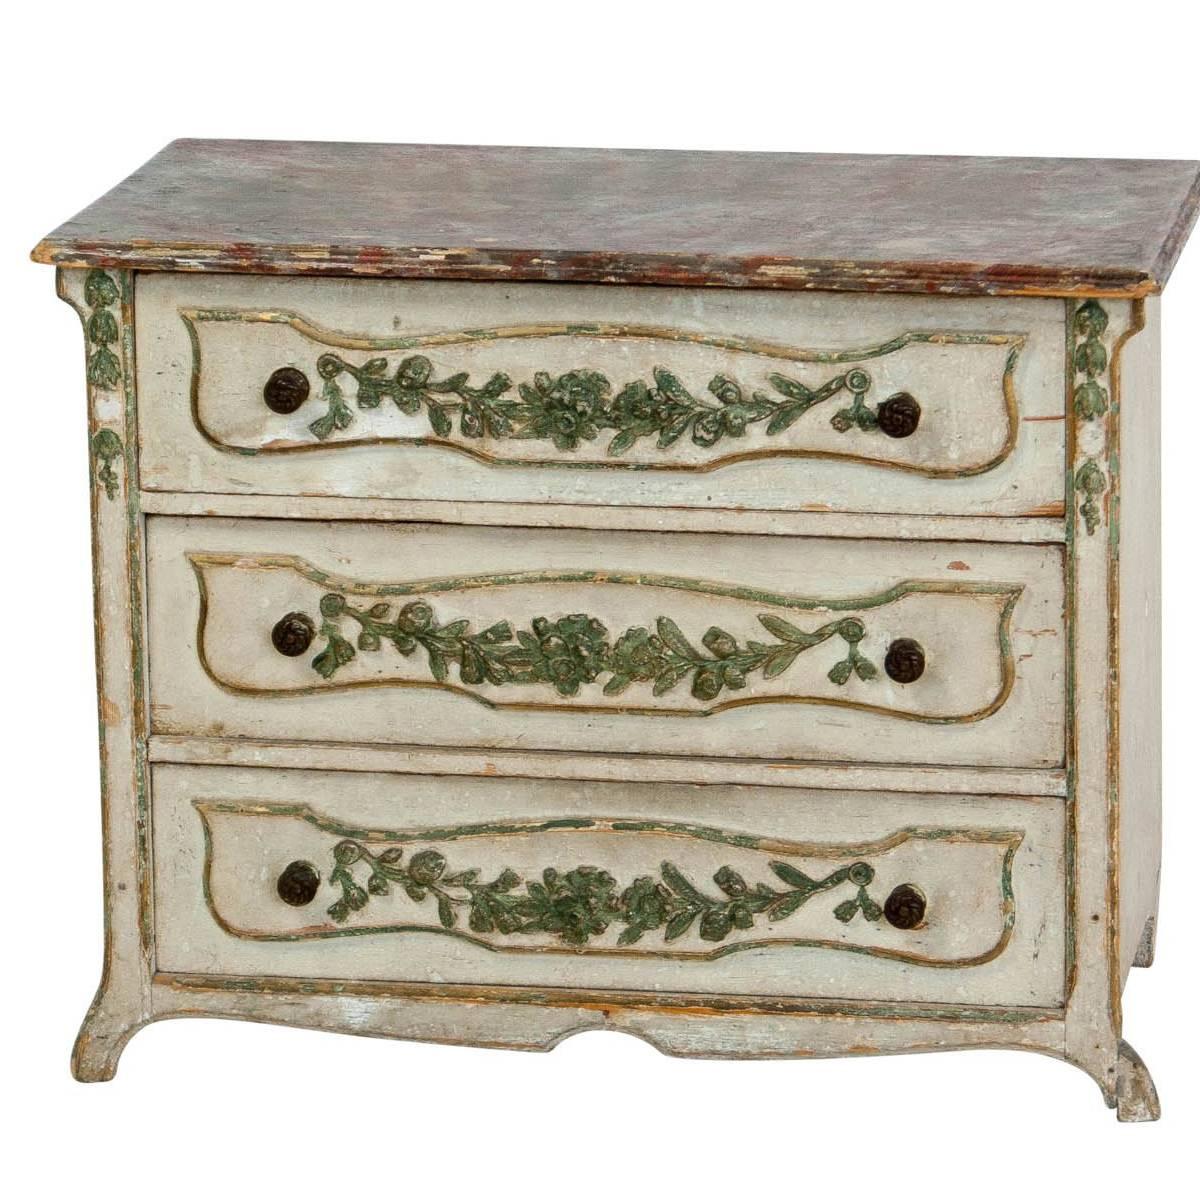 Miniature Italian Painted Chest of Drawers, circa 1870